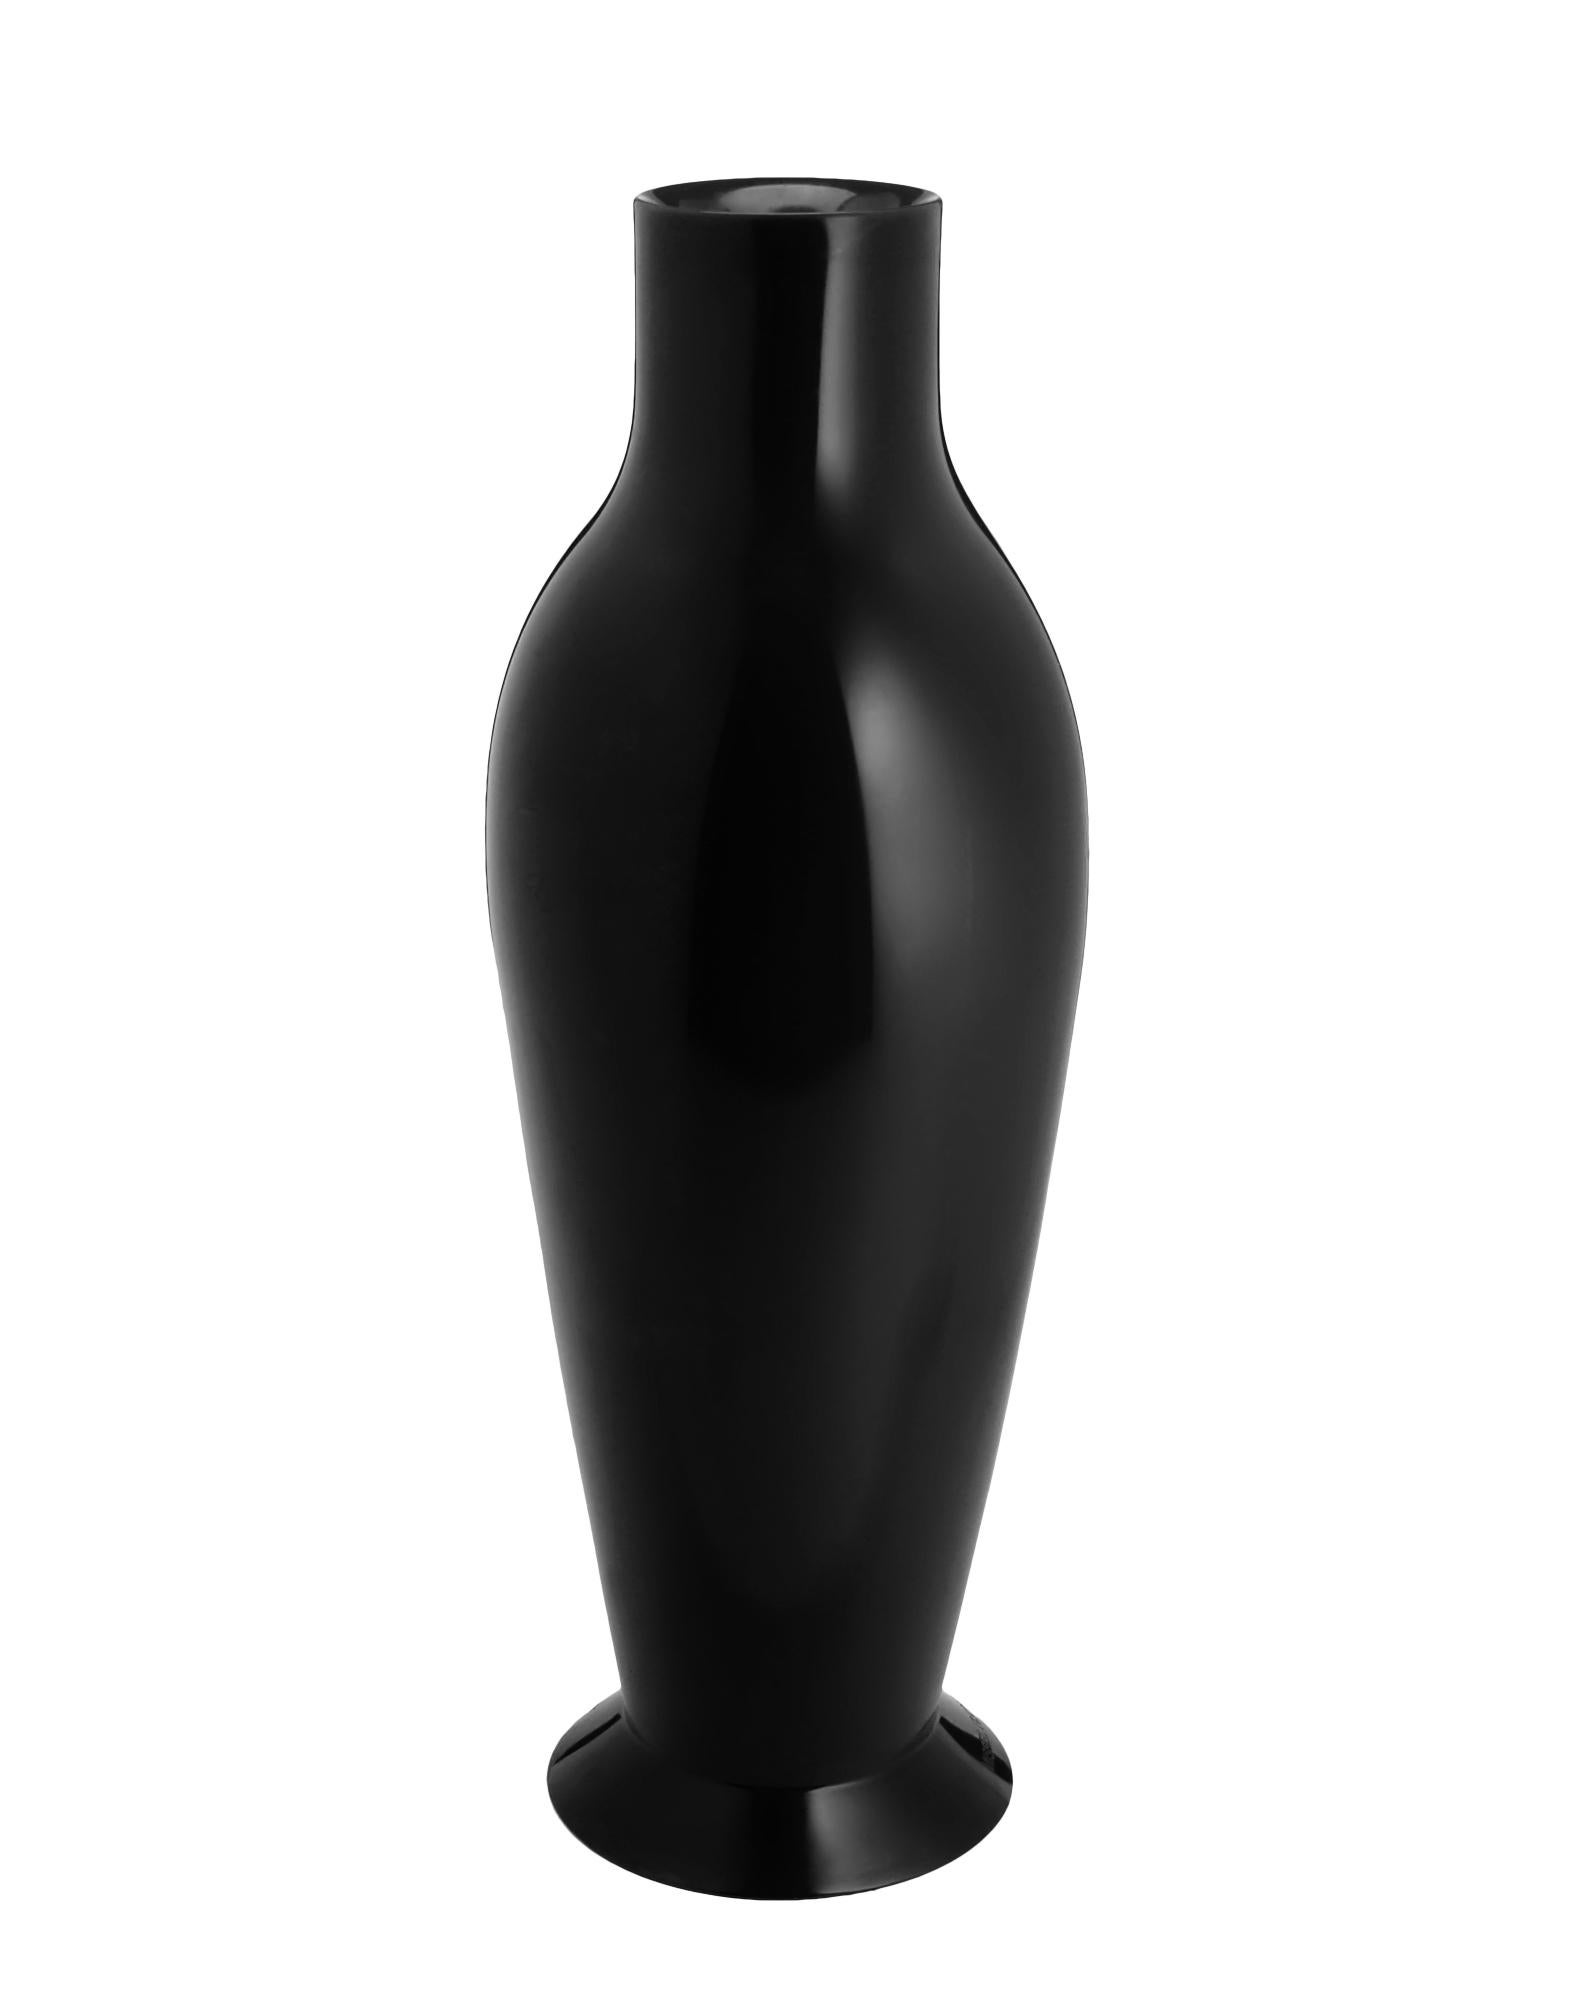 Miss flower power is the planter with an elongated Silhouette and generous dimensions capable of giving a touch of personality to outdoor settings.

Available in black, glossy white and red.